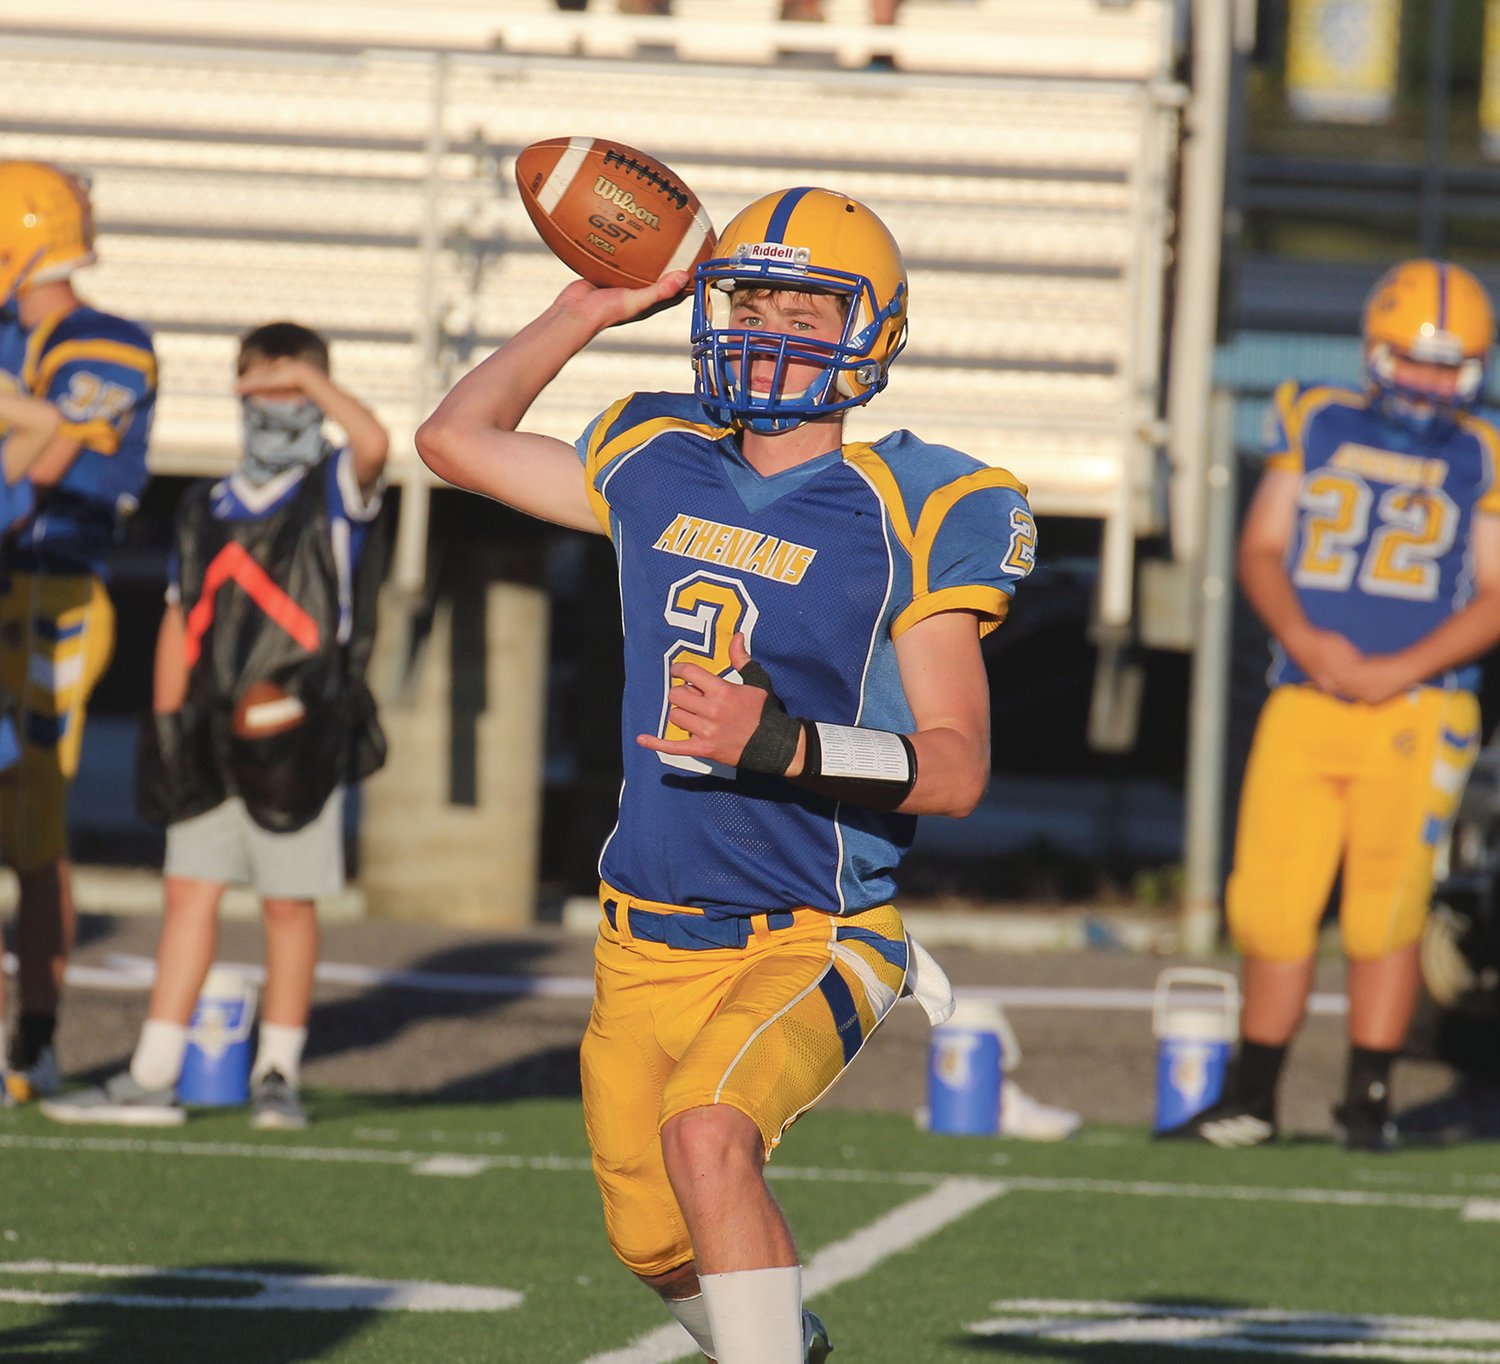 Kaiden Underwood fires a pass in the Athenians' 48-14 loss to Western Boone on Friday.